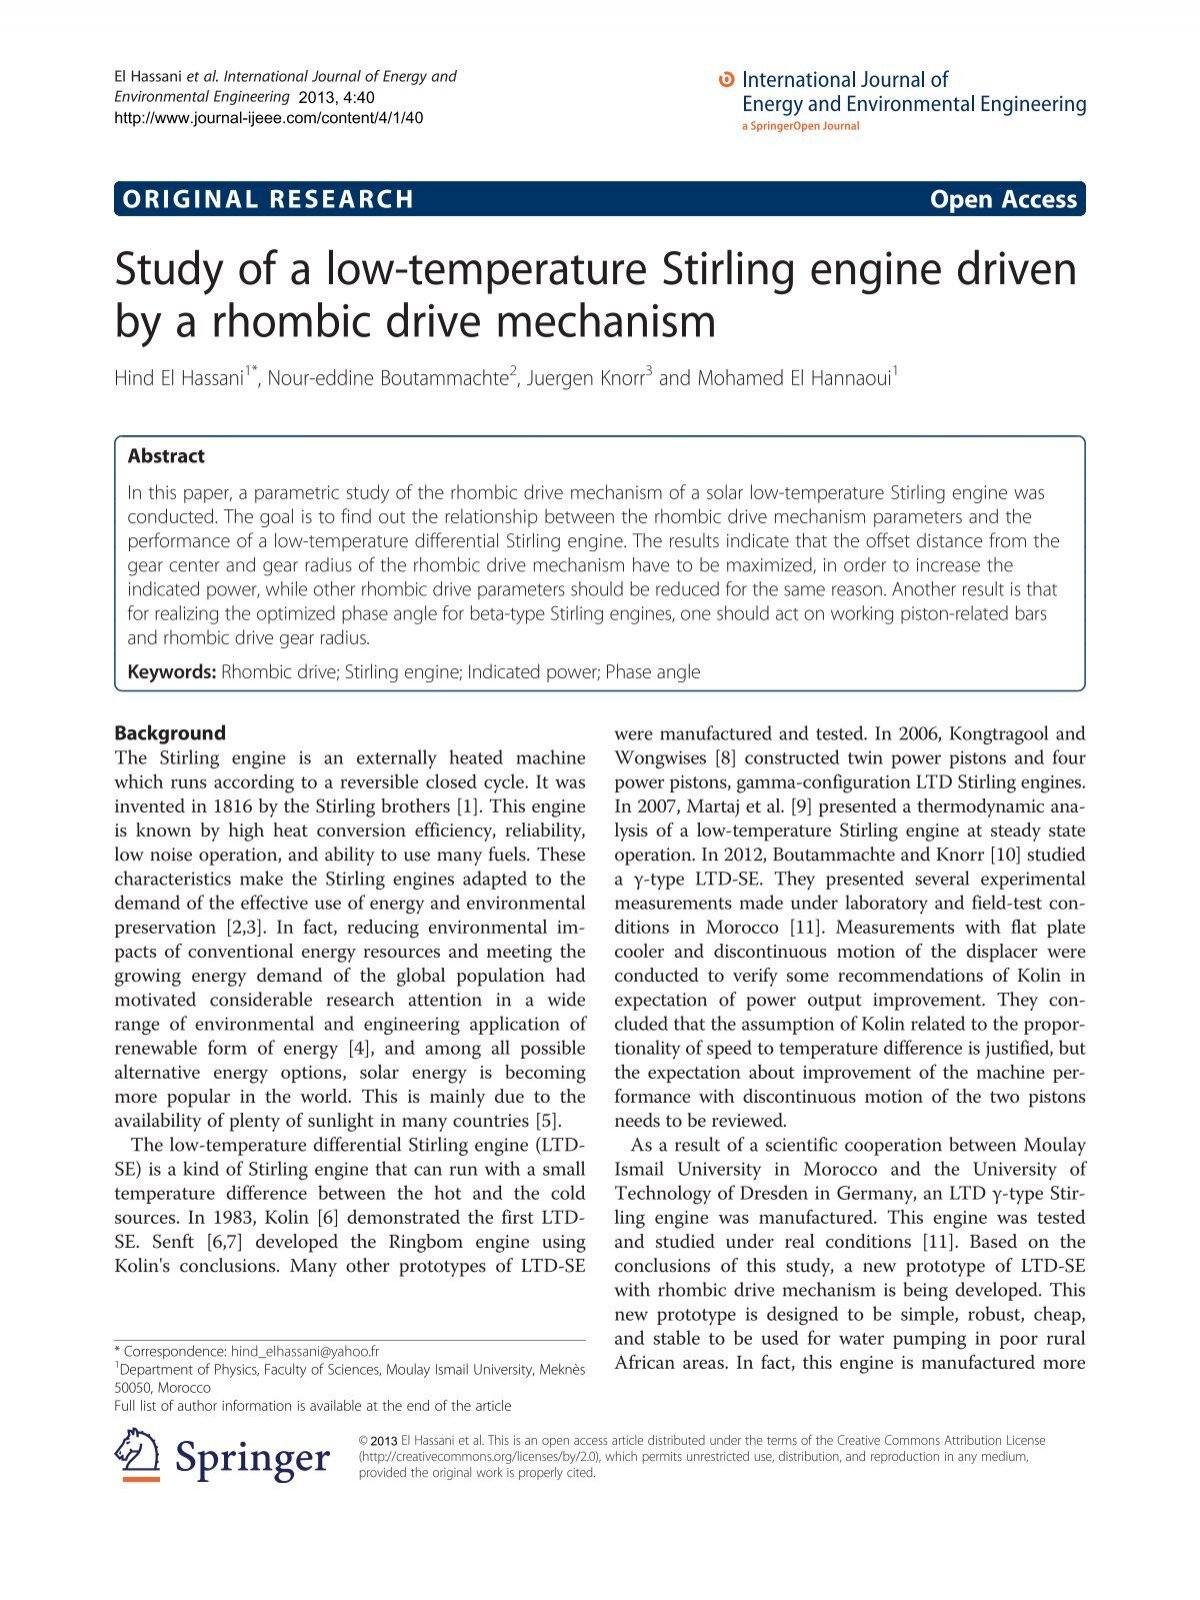 Study Of A Low Temperature Stirling Engine Driven By A Rhombic Drive